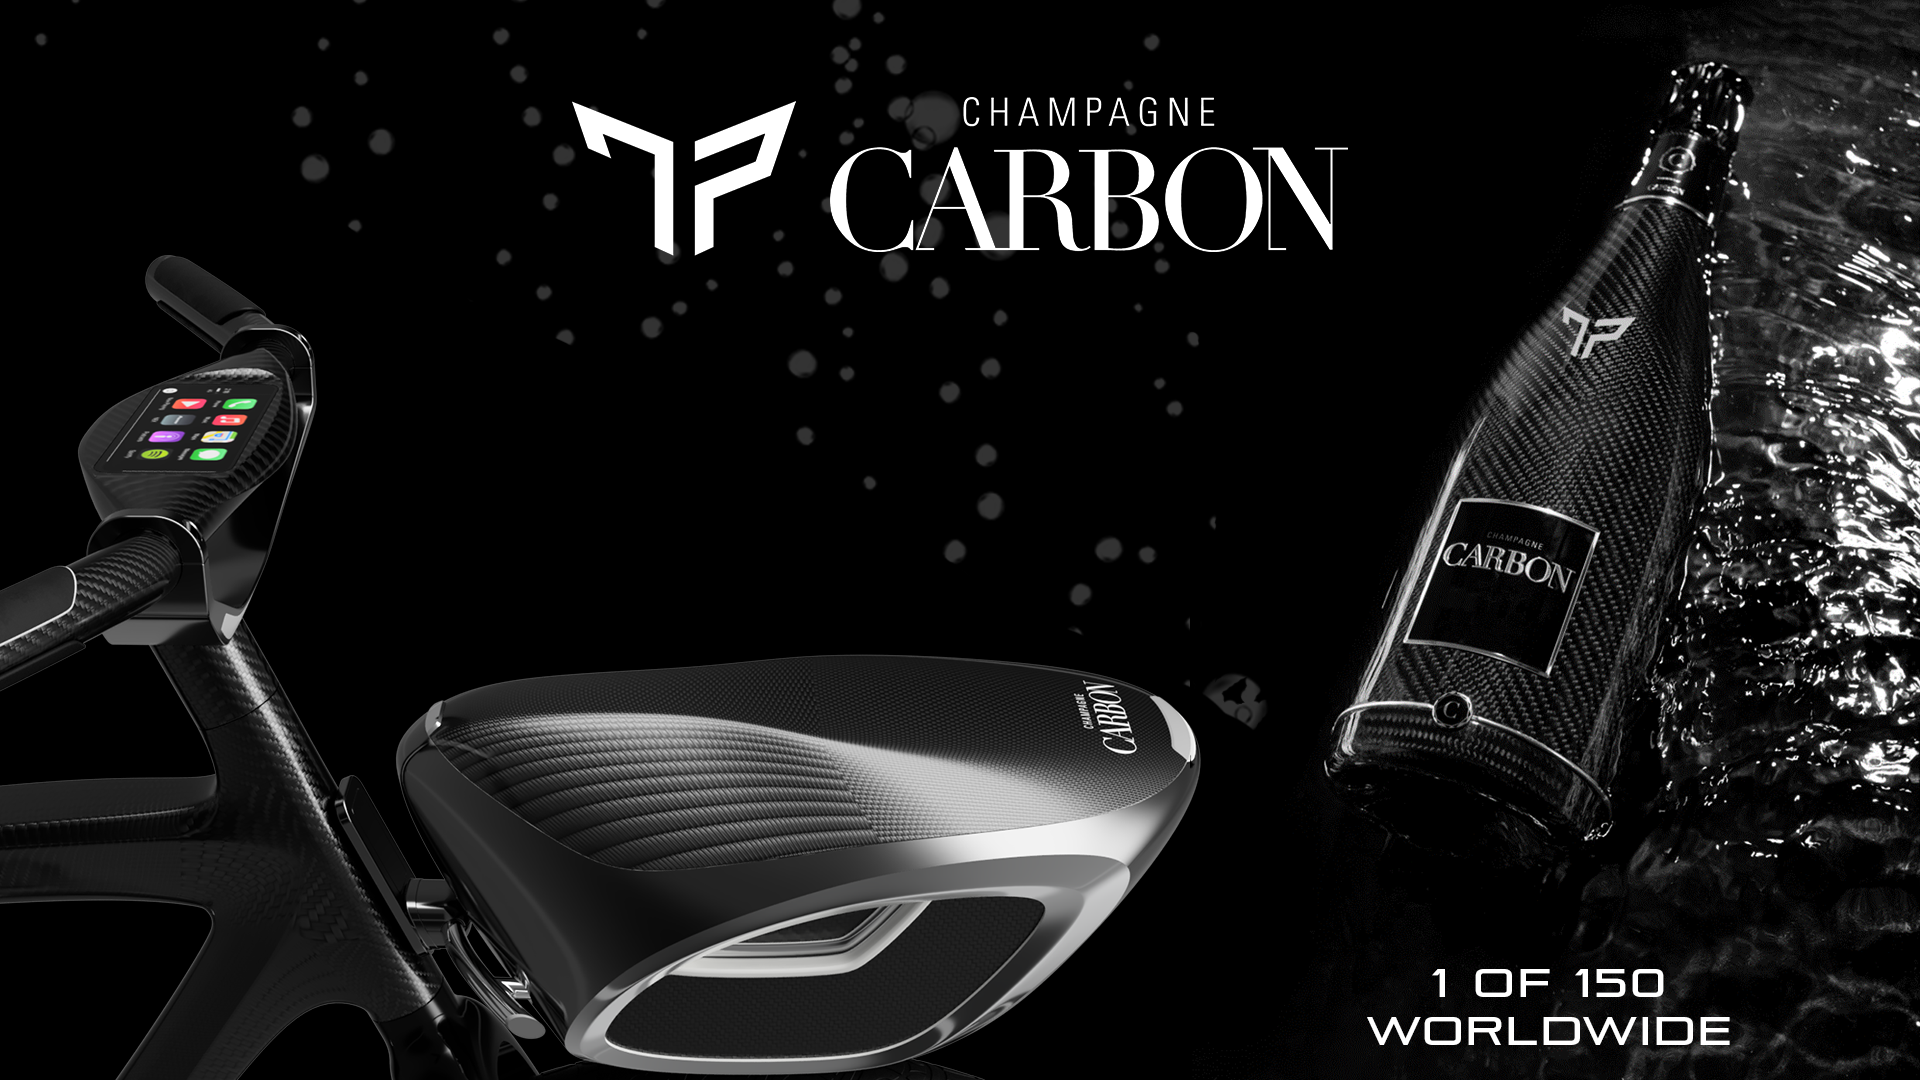 Champagne Carbon_Campaign Image 24.png